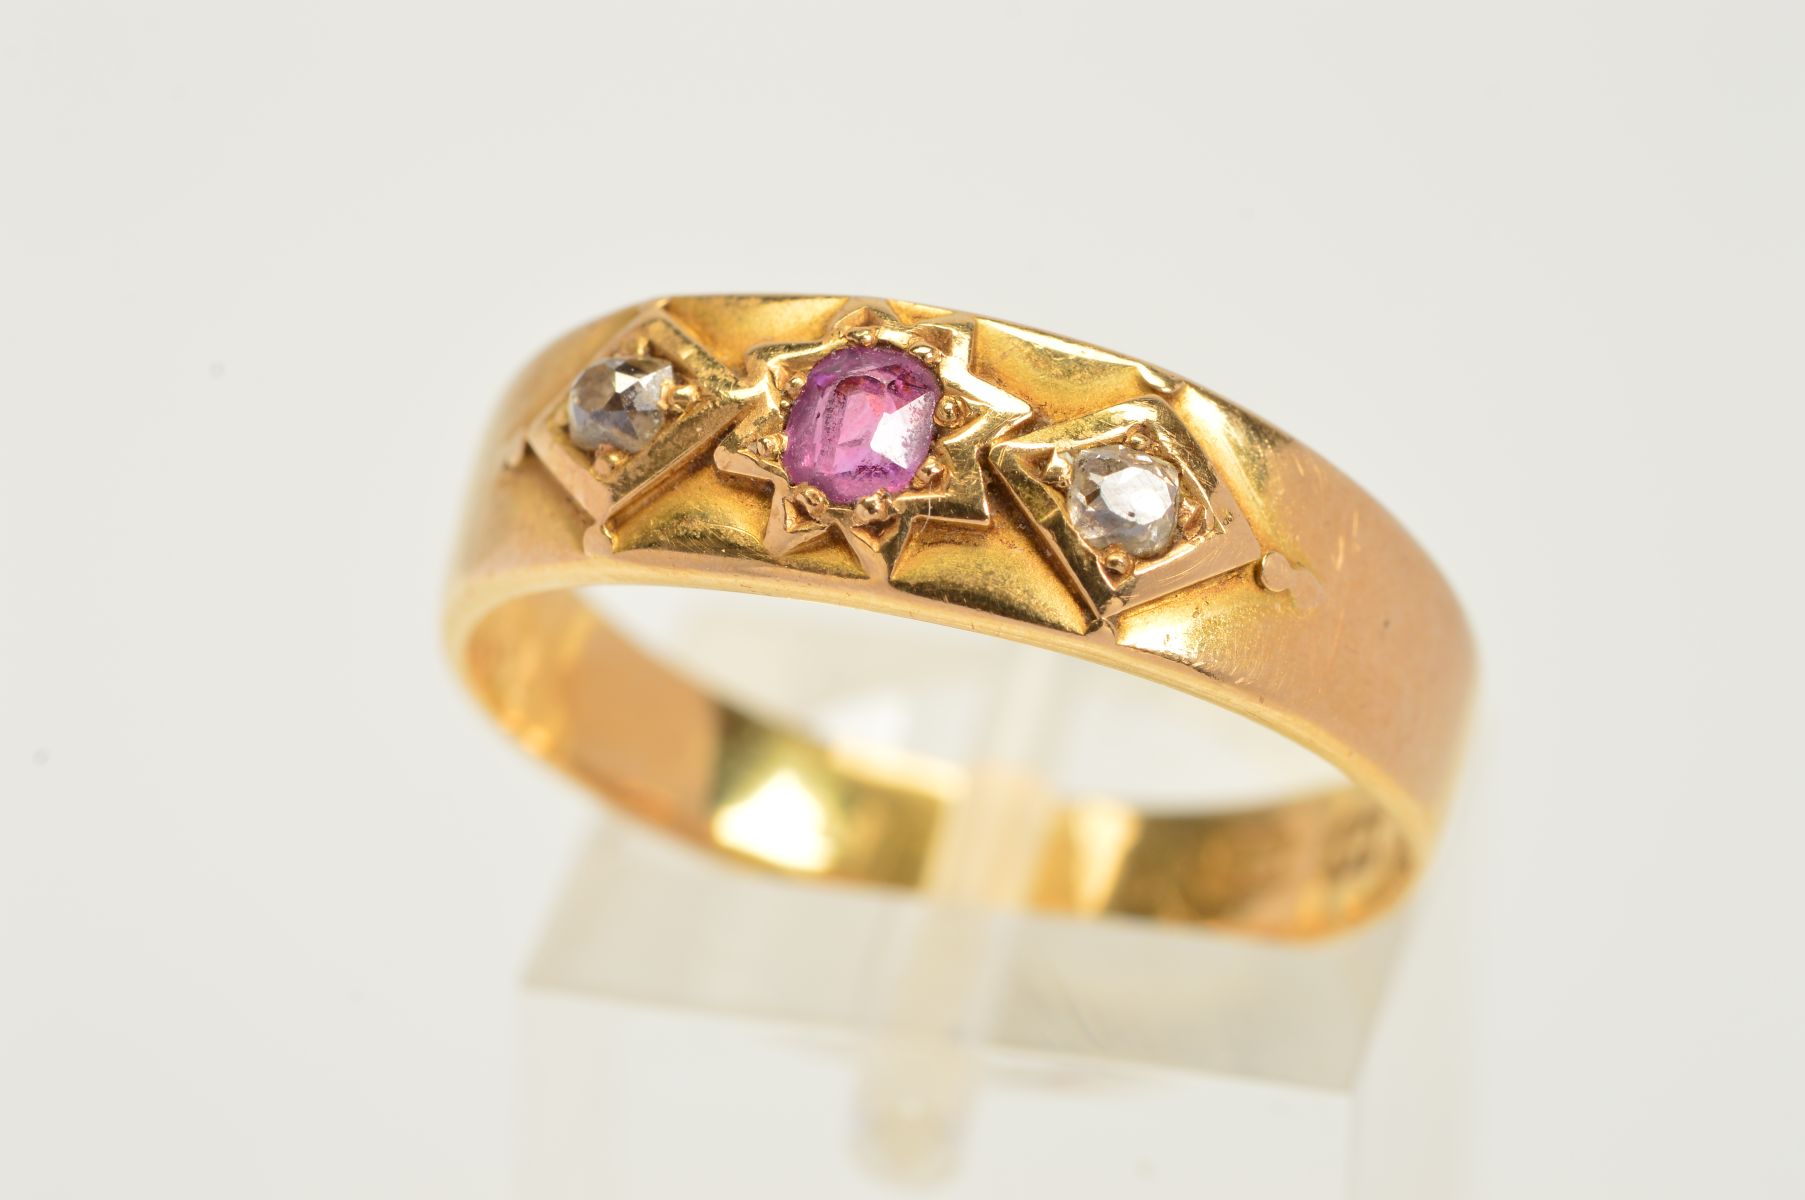 A MID VICTORIAN 18CT GOLD RUBY AND DIAMOND RUBY RING, designed as a central circular ruby within a